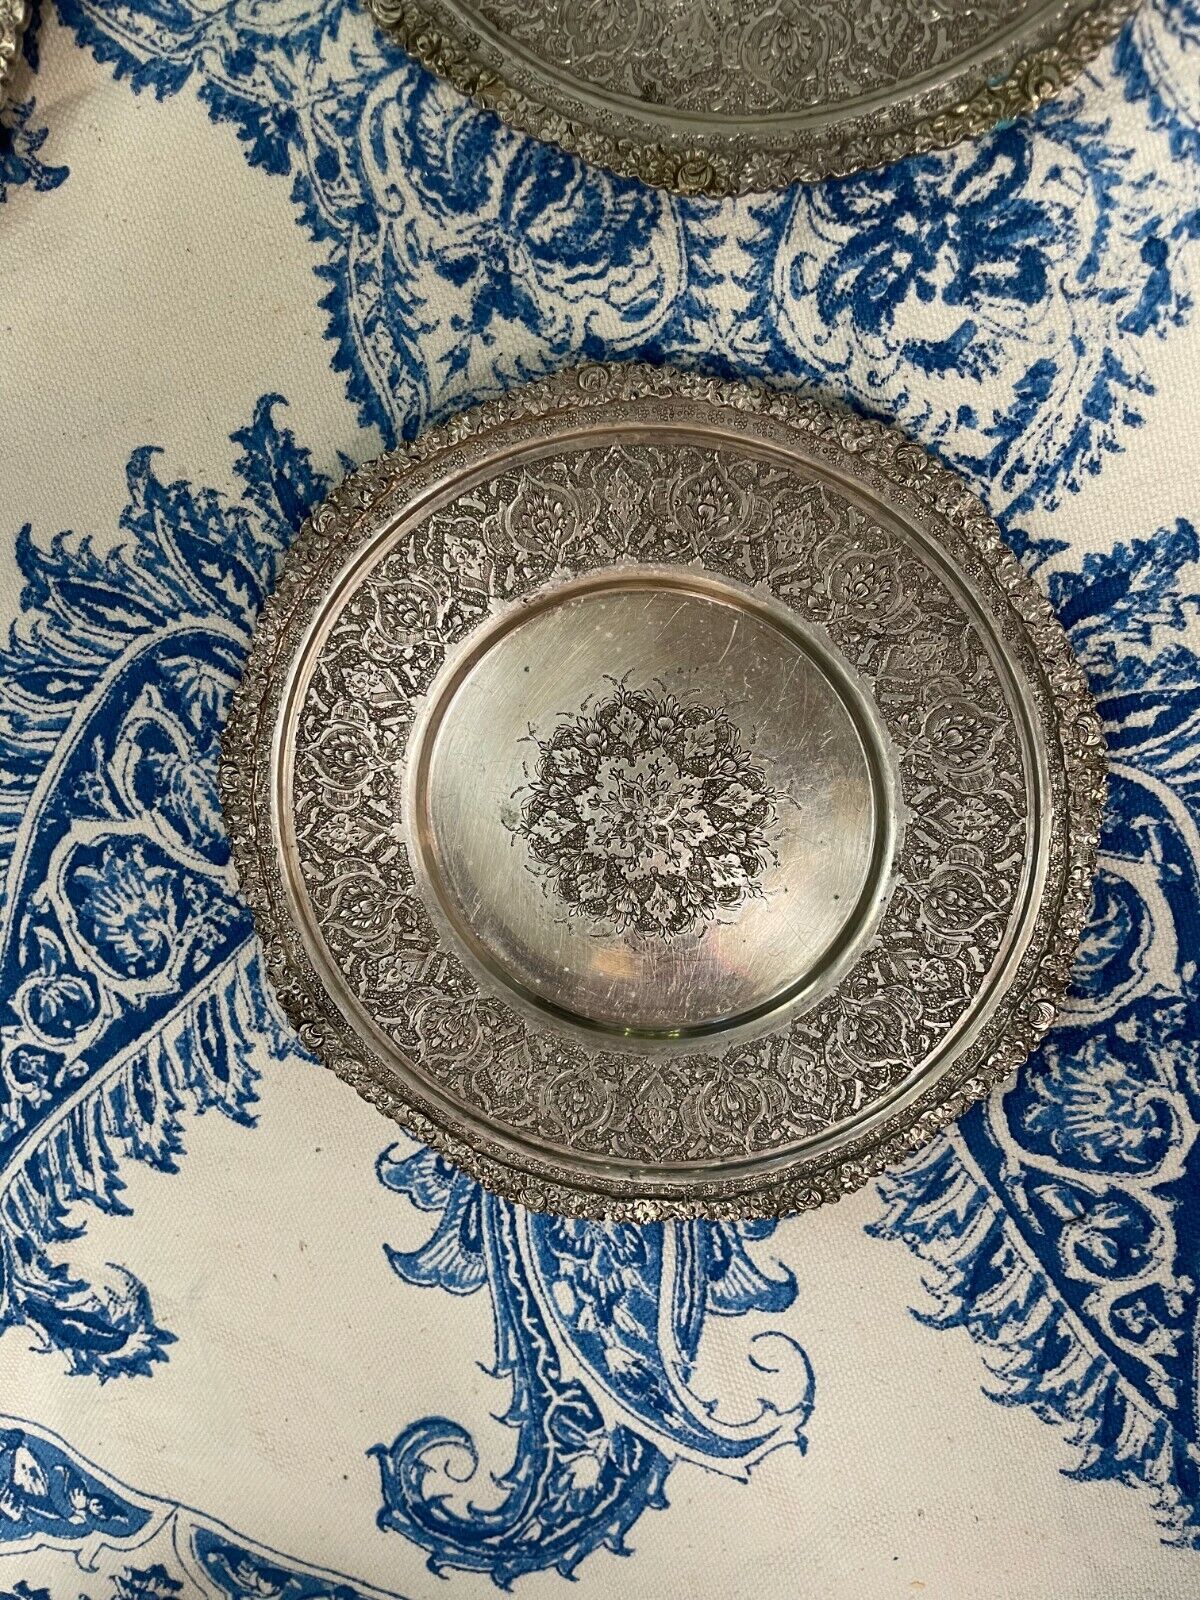 6 Plate Set AUTHENTIC Antique 84 Silver Persian Islamic middle eastern Art  Без бренда - фотография #3